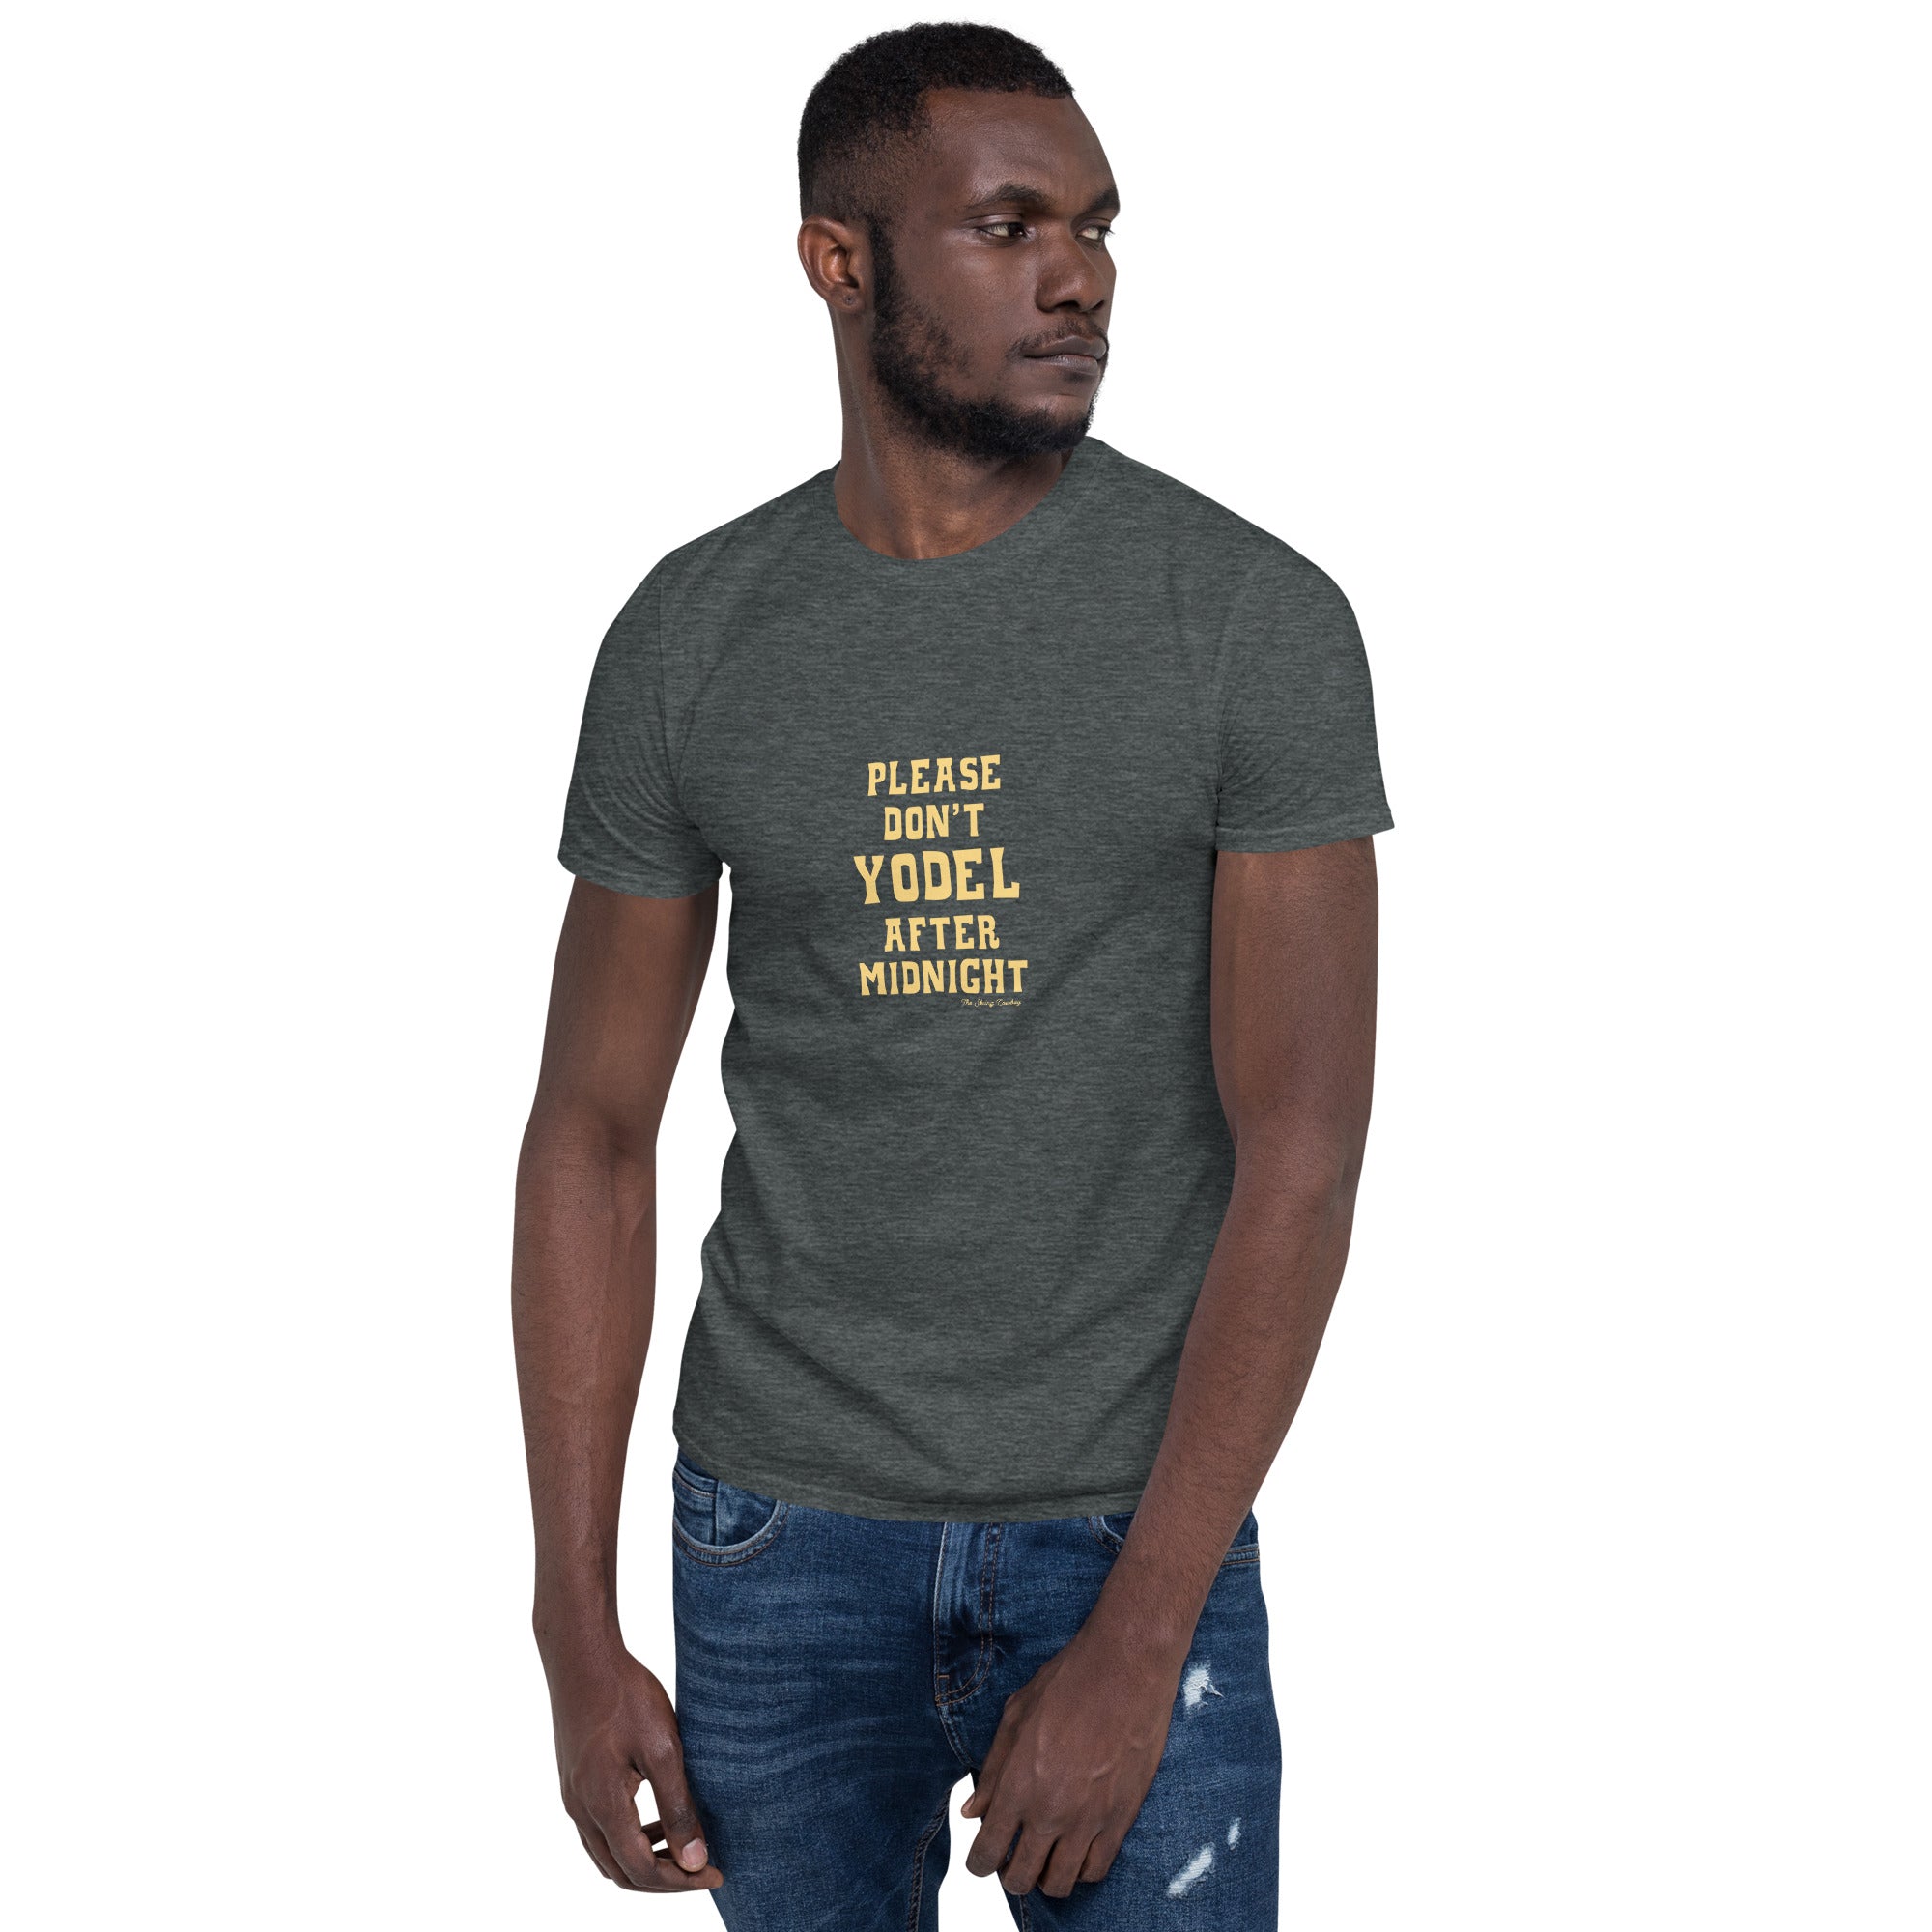 T-shirt softstyle en coton Don't Yodel After Midnight sur fond sombre